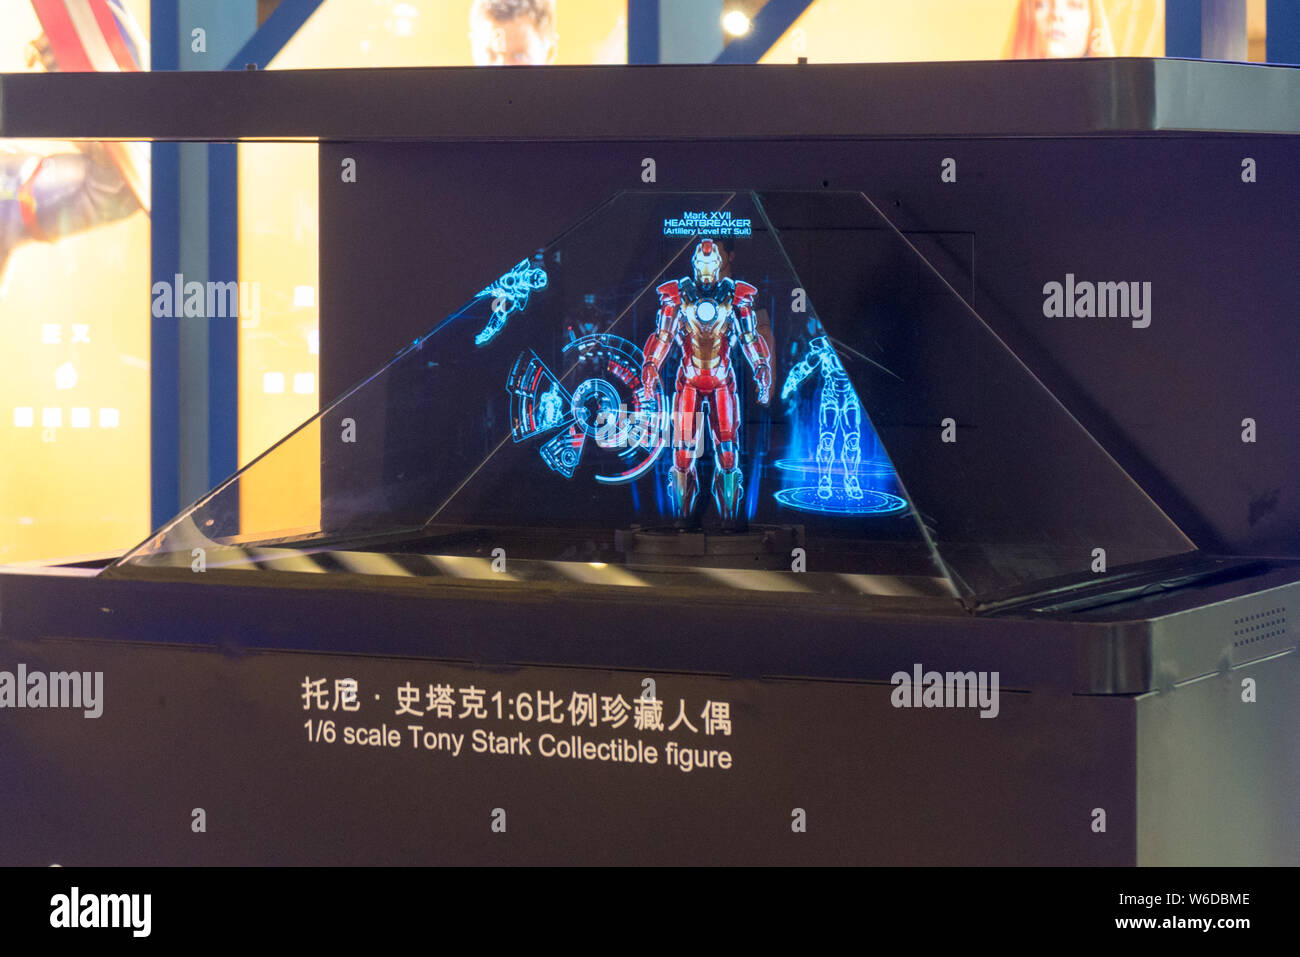 View of the 'Avengers: Infinity War' exhibition at the IAPM shopping mall in Shanghai, China, 17 August 2015.     With Avengers: Infinity War mania in Stock Photo